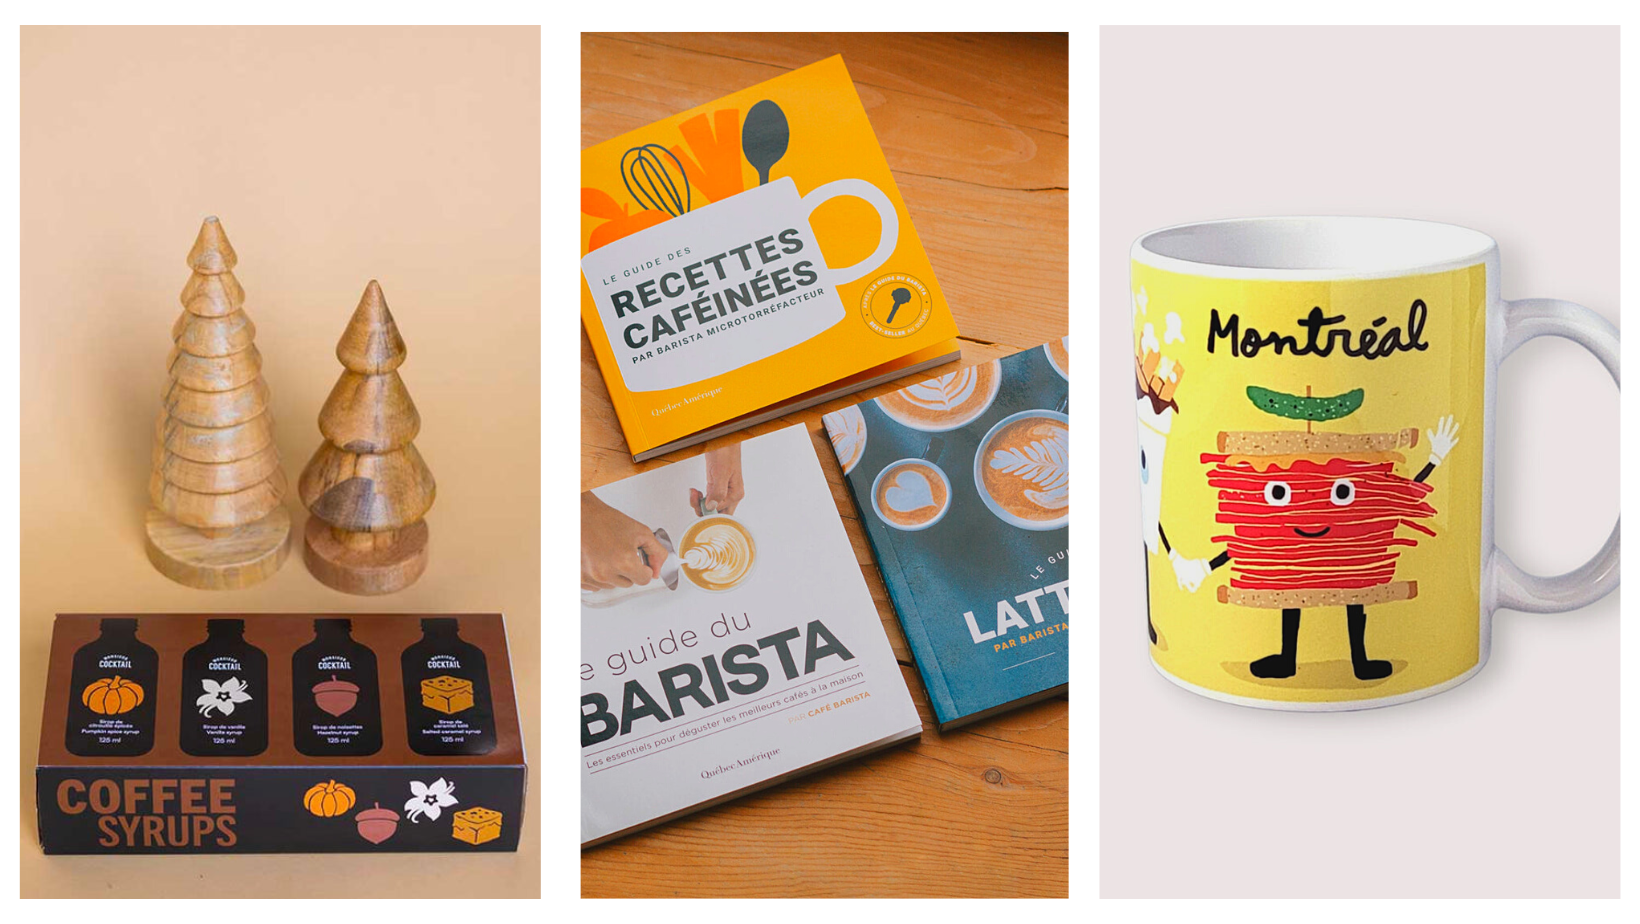 Gift Guide :: The Indie Food Lover — The Grit and Polish